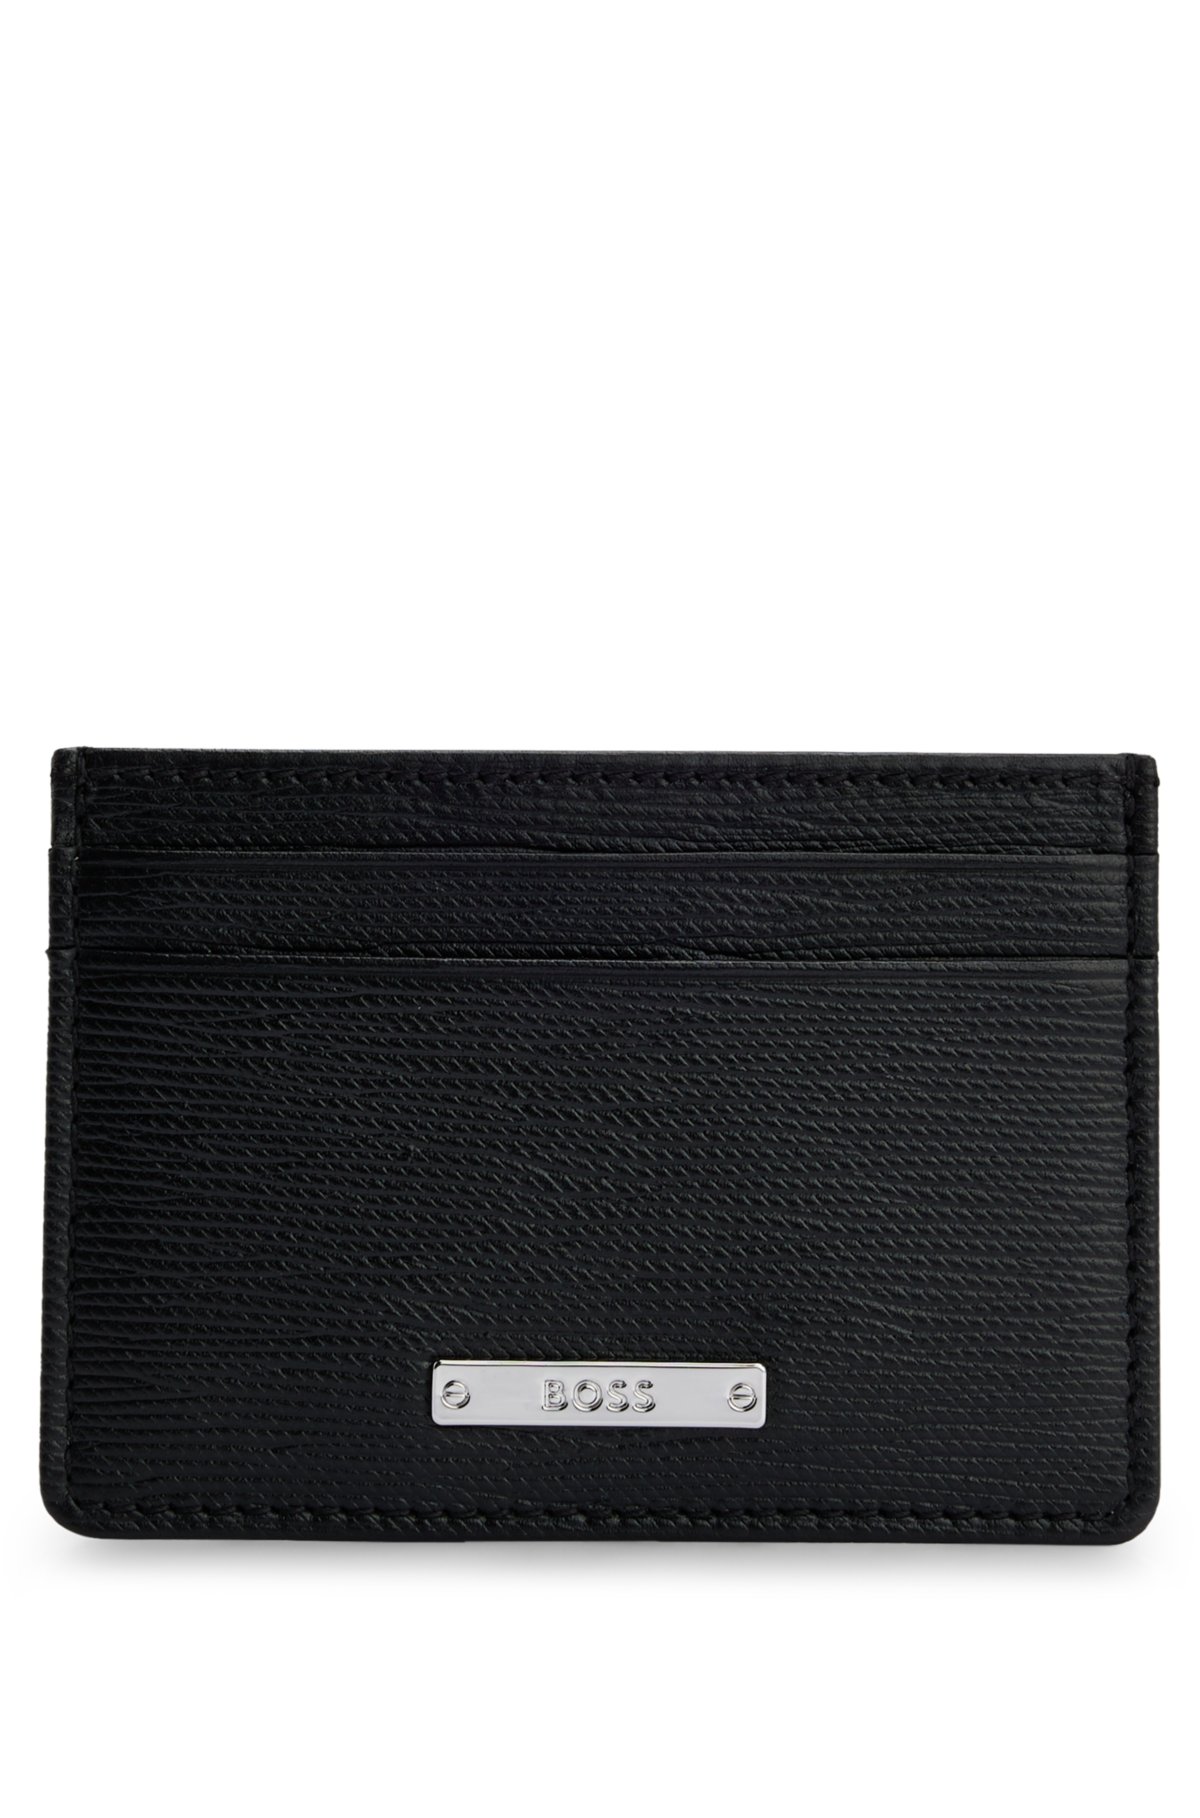 Gucci Wallet, Men's Fashion, Watches & Accessories, Wallets & Card